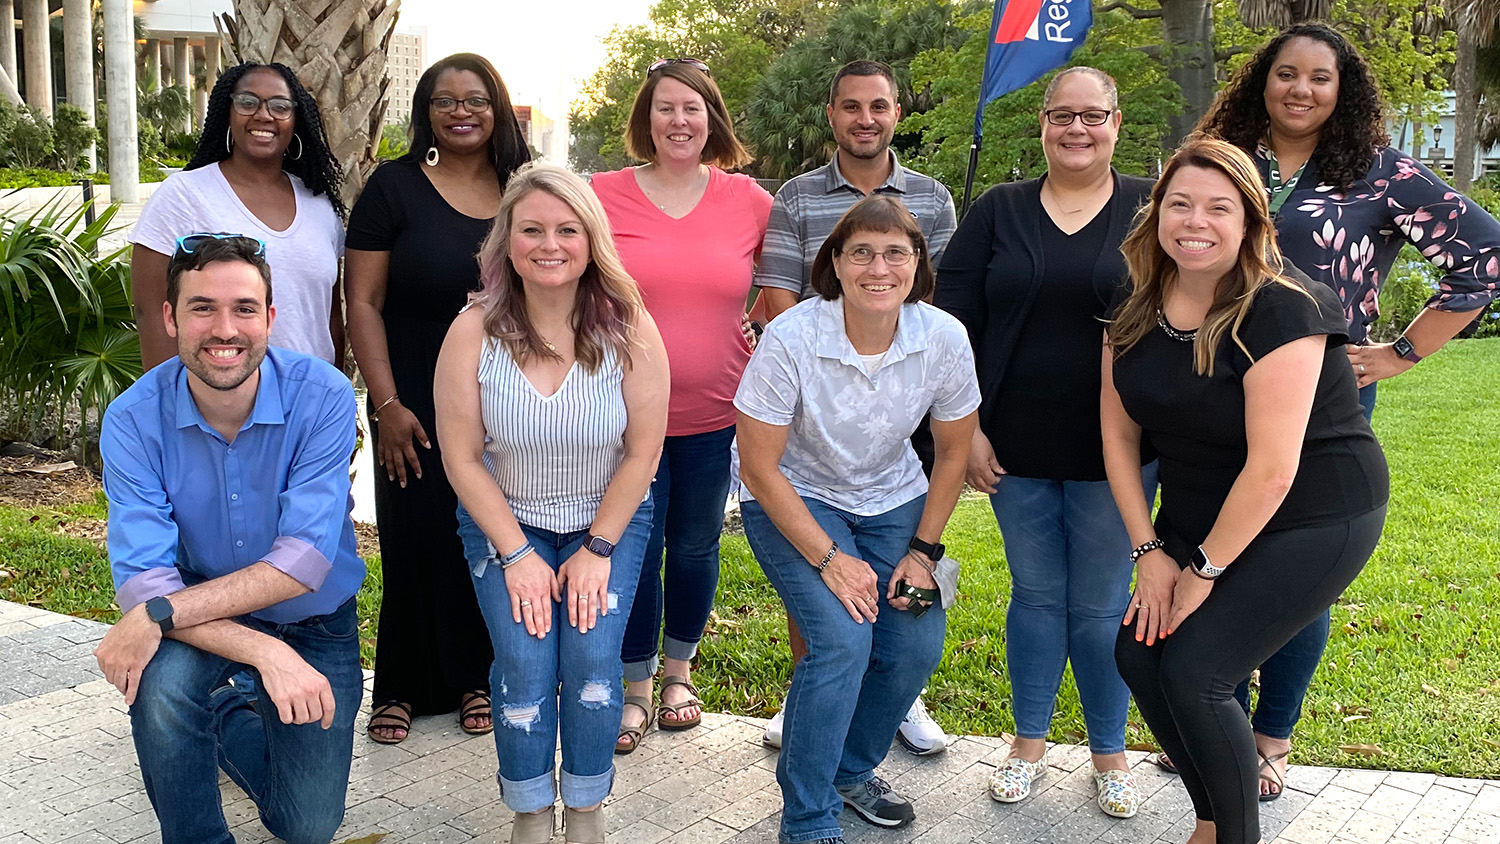 Kartina Pawvluk, NC State University Housing’s director of administration and occupancy management (bottom row, second from right) at the 2022 Southeastern Association of Housing Officers’ Regional Entry Level Institute.